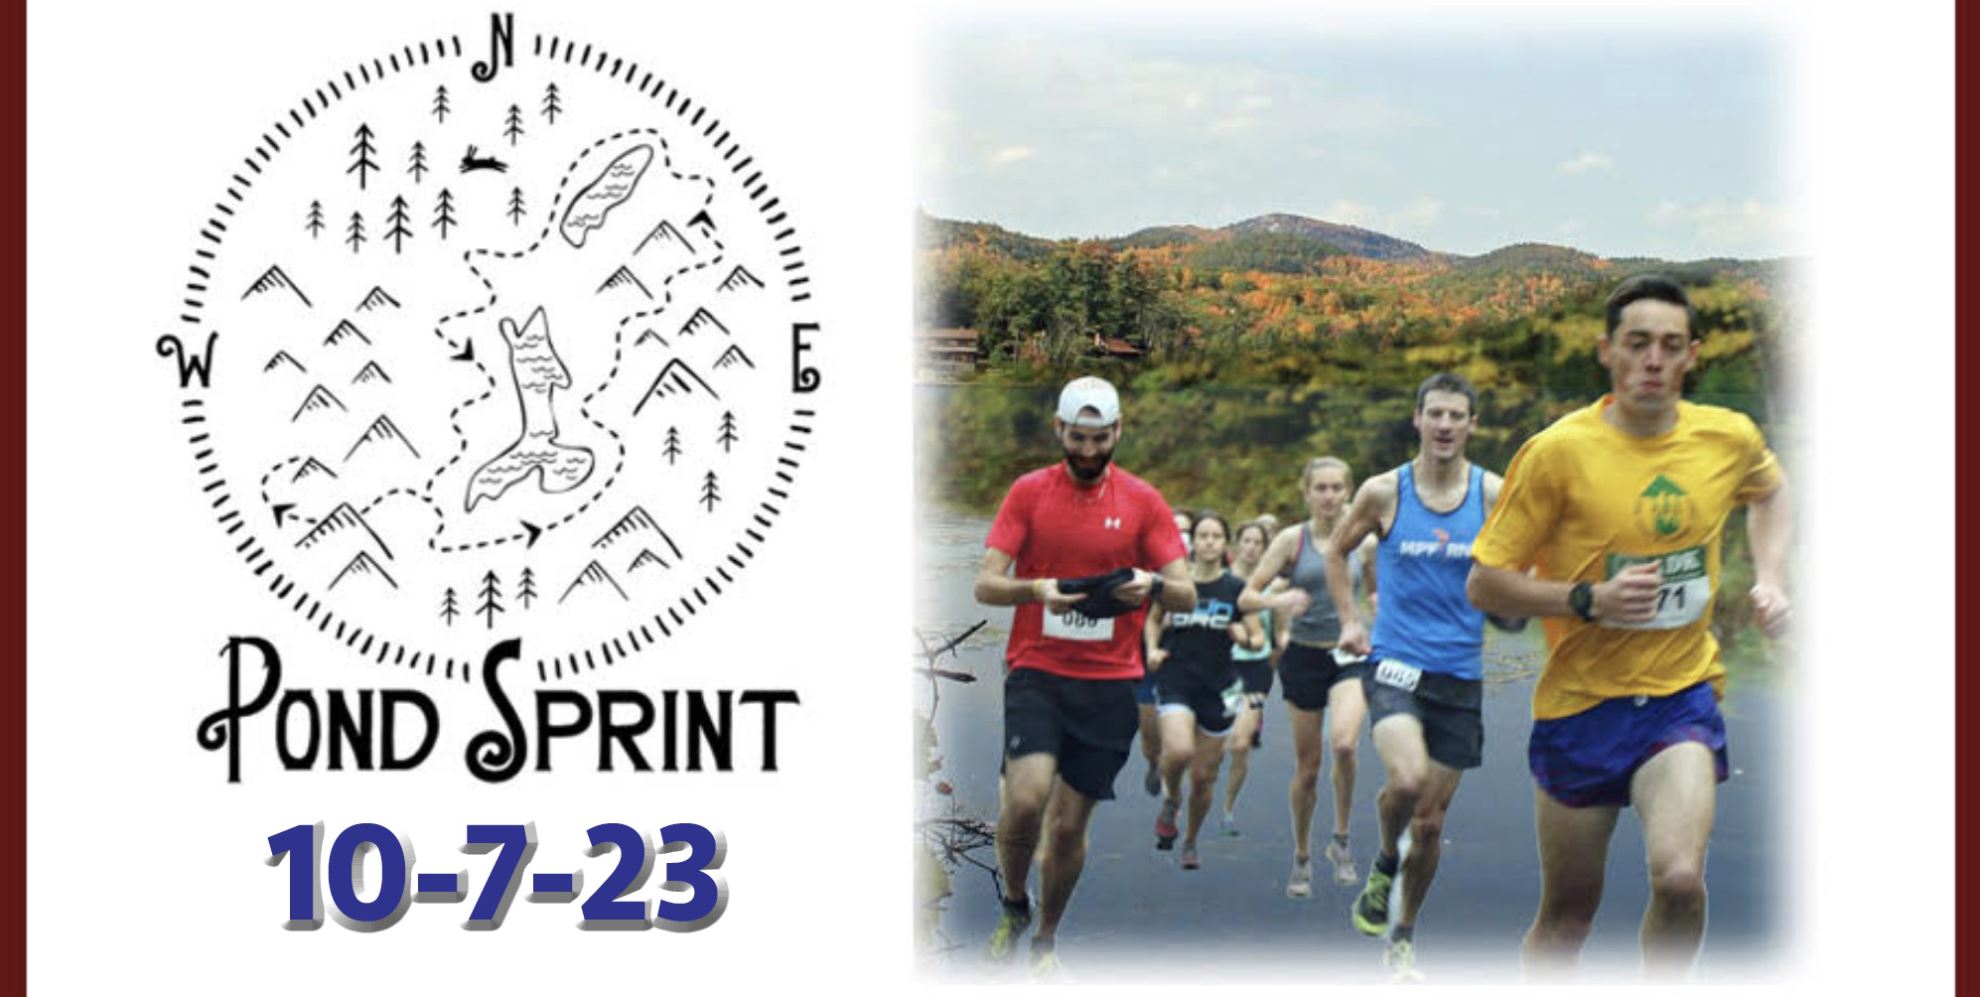 23 Pond Sprint Adventure Race, Run, Hike, and Party!